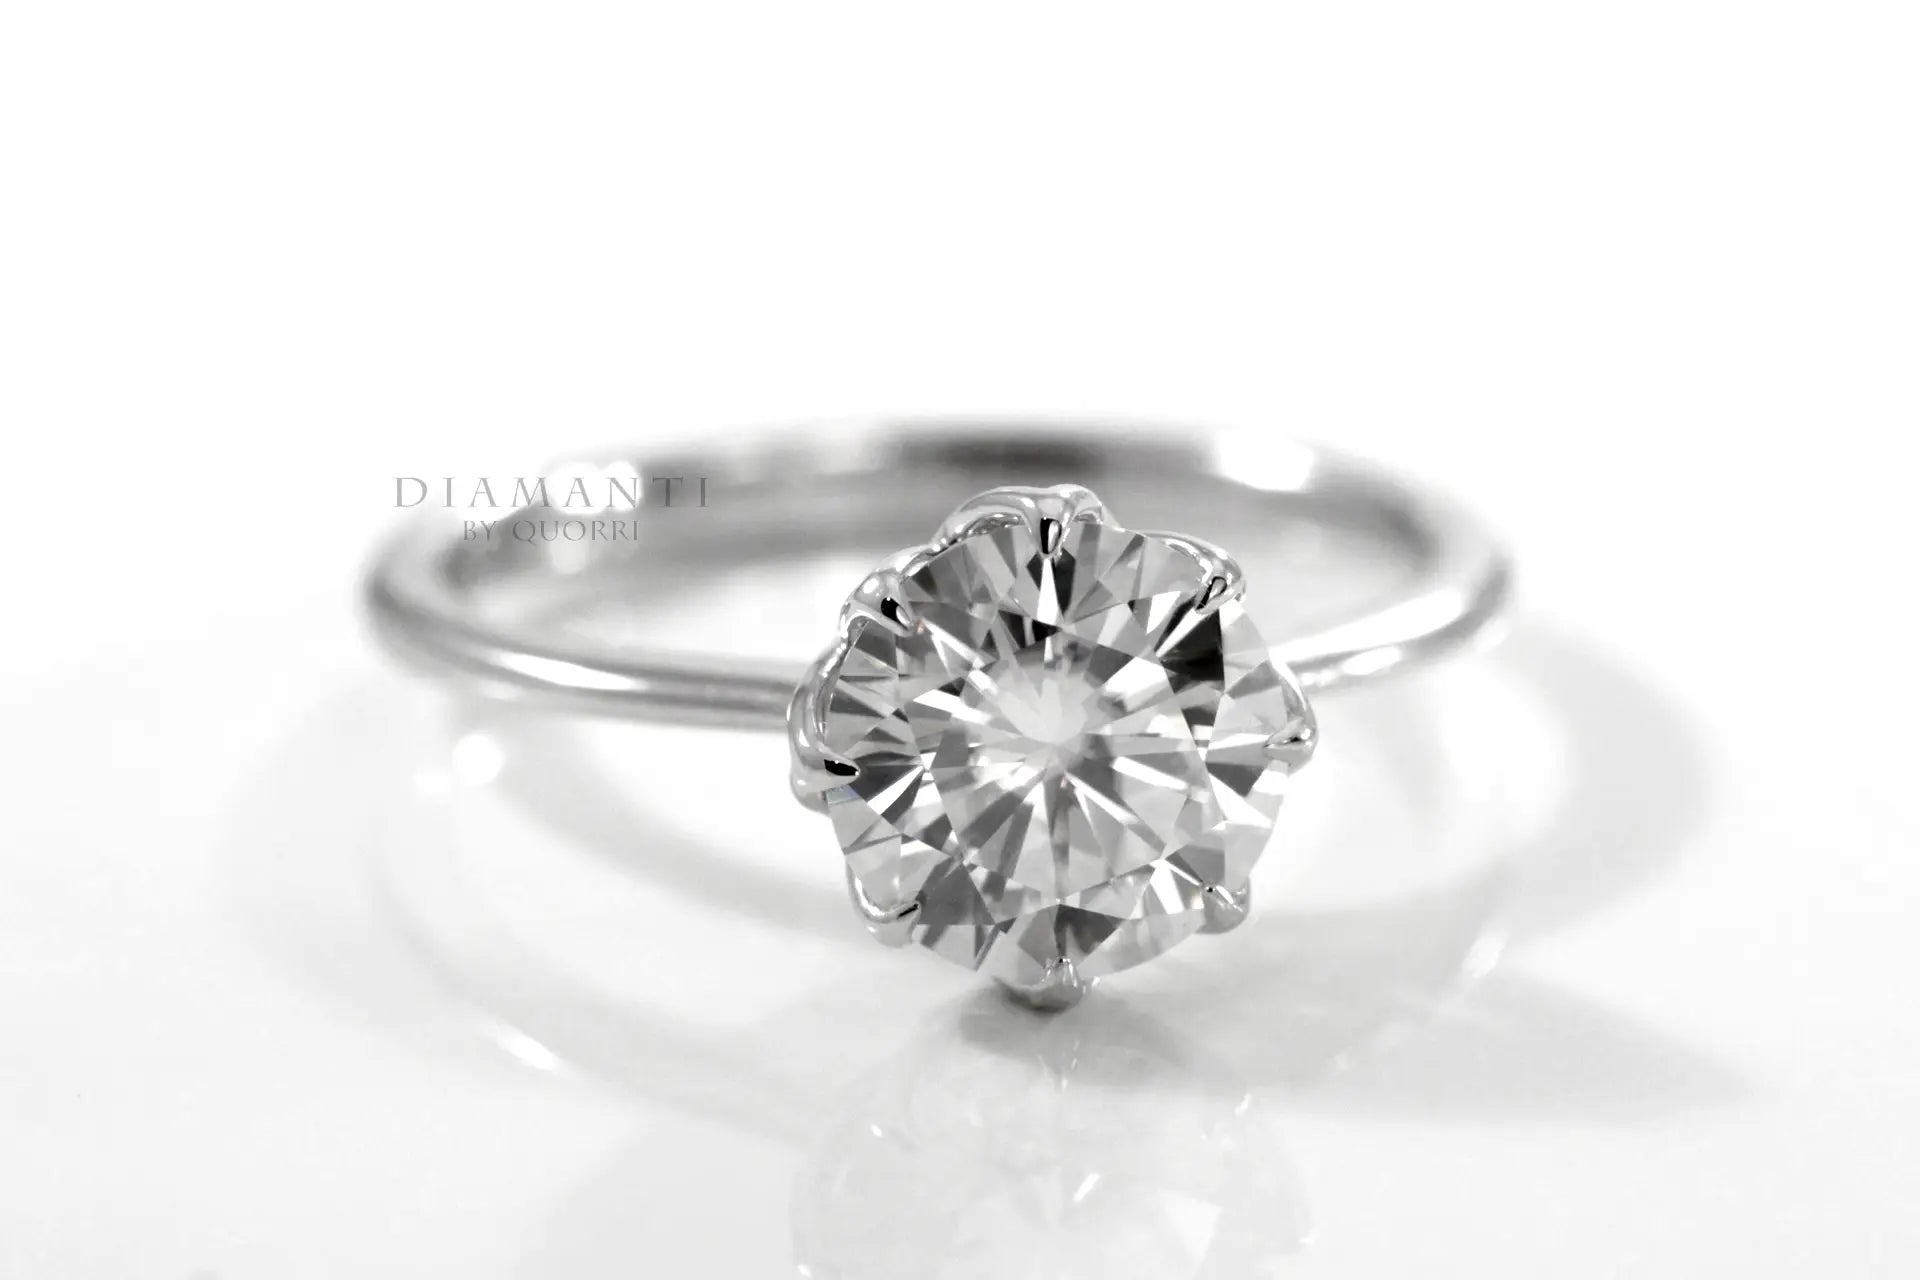 3.5 carat white gold affordable eight prong petal design round lab grown diamond solitaire engagement ring